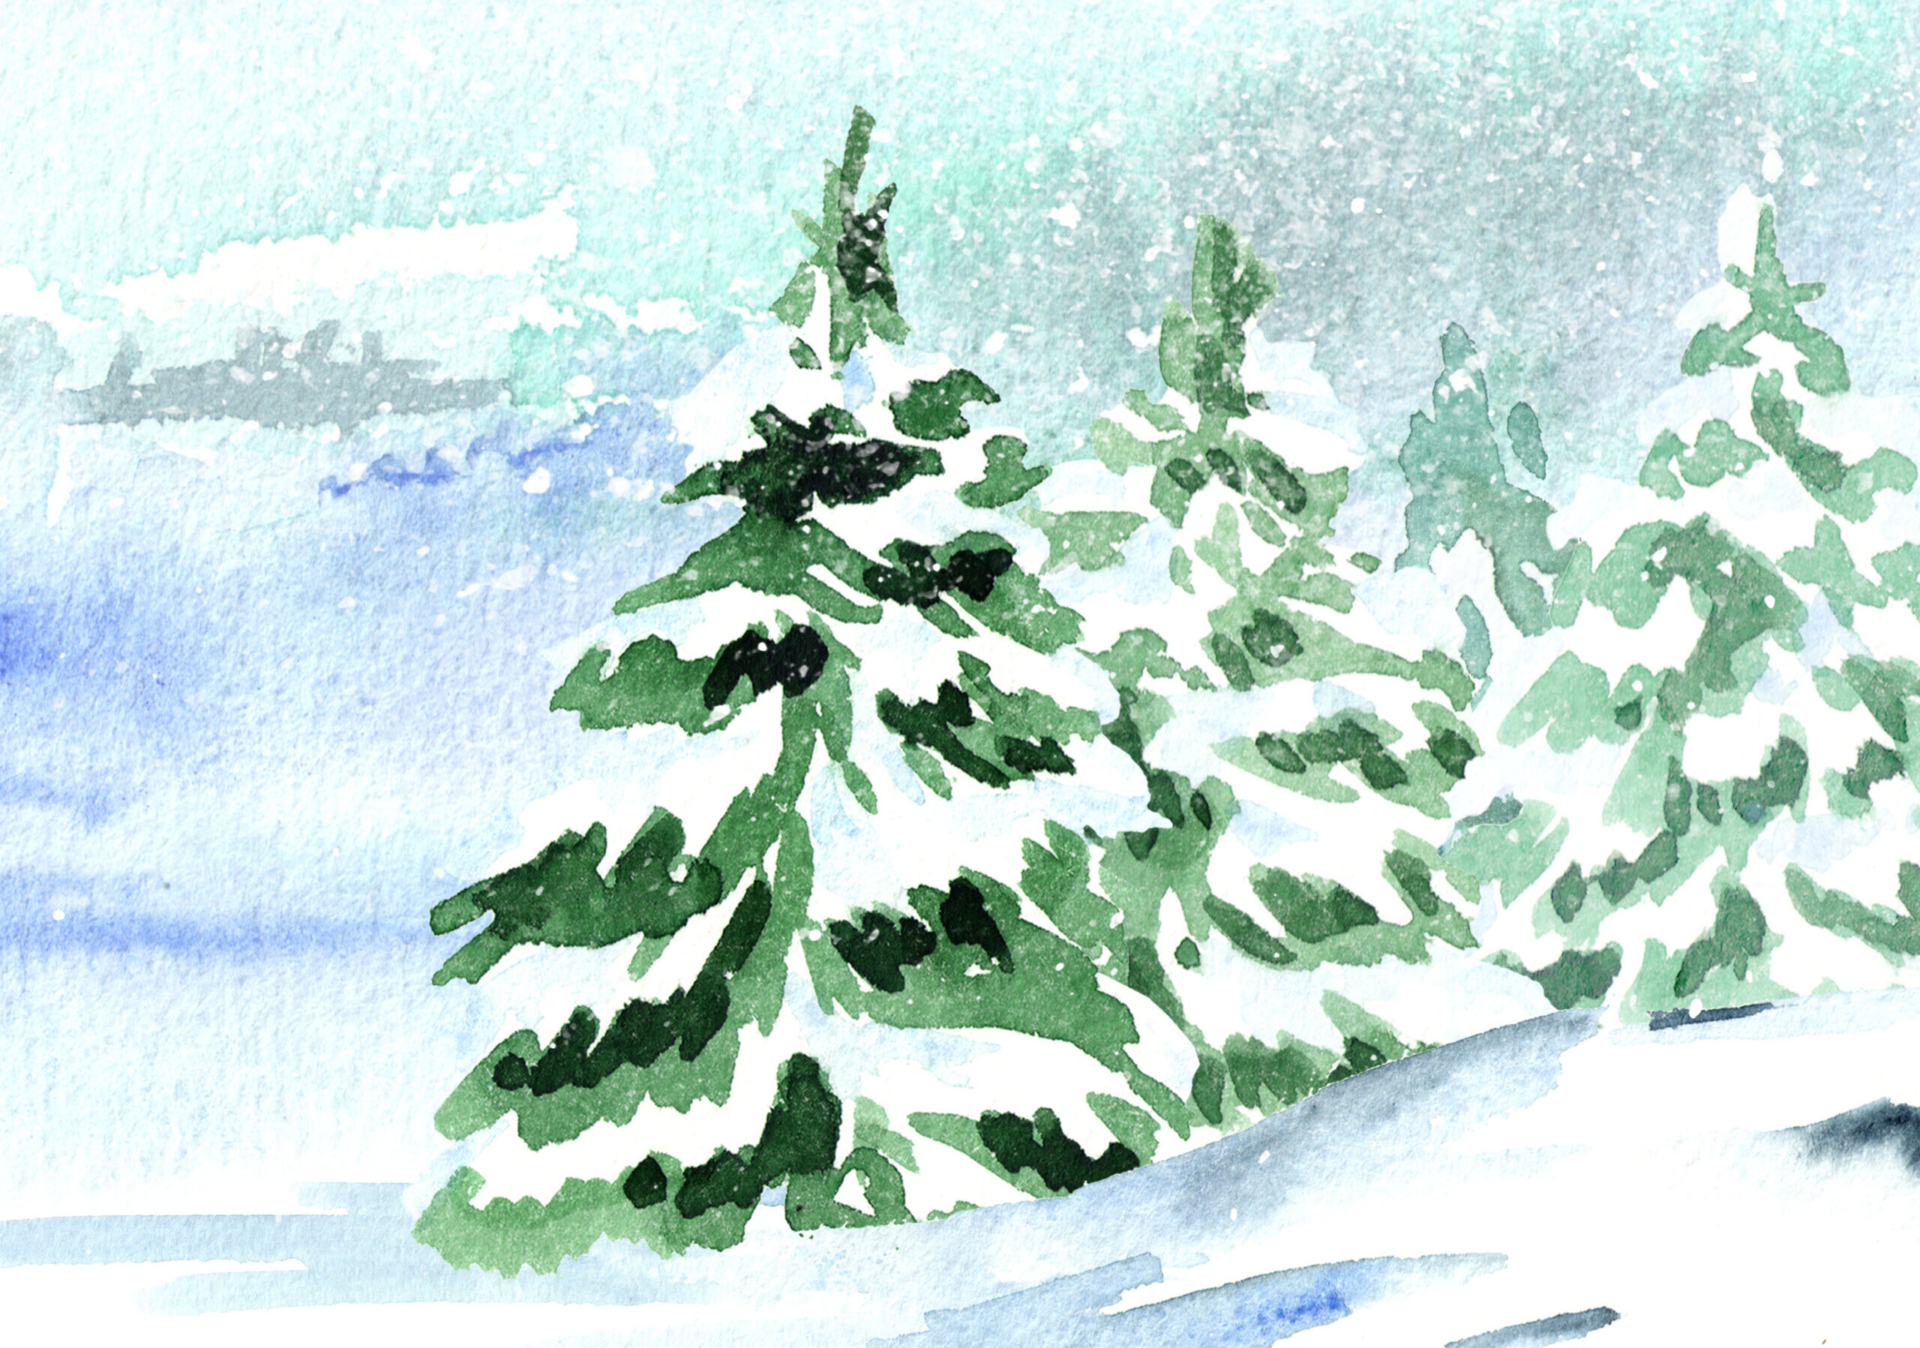 Watercolor painting of conifer trees covered in snow